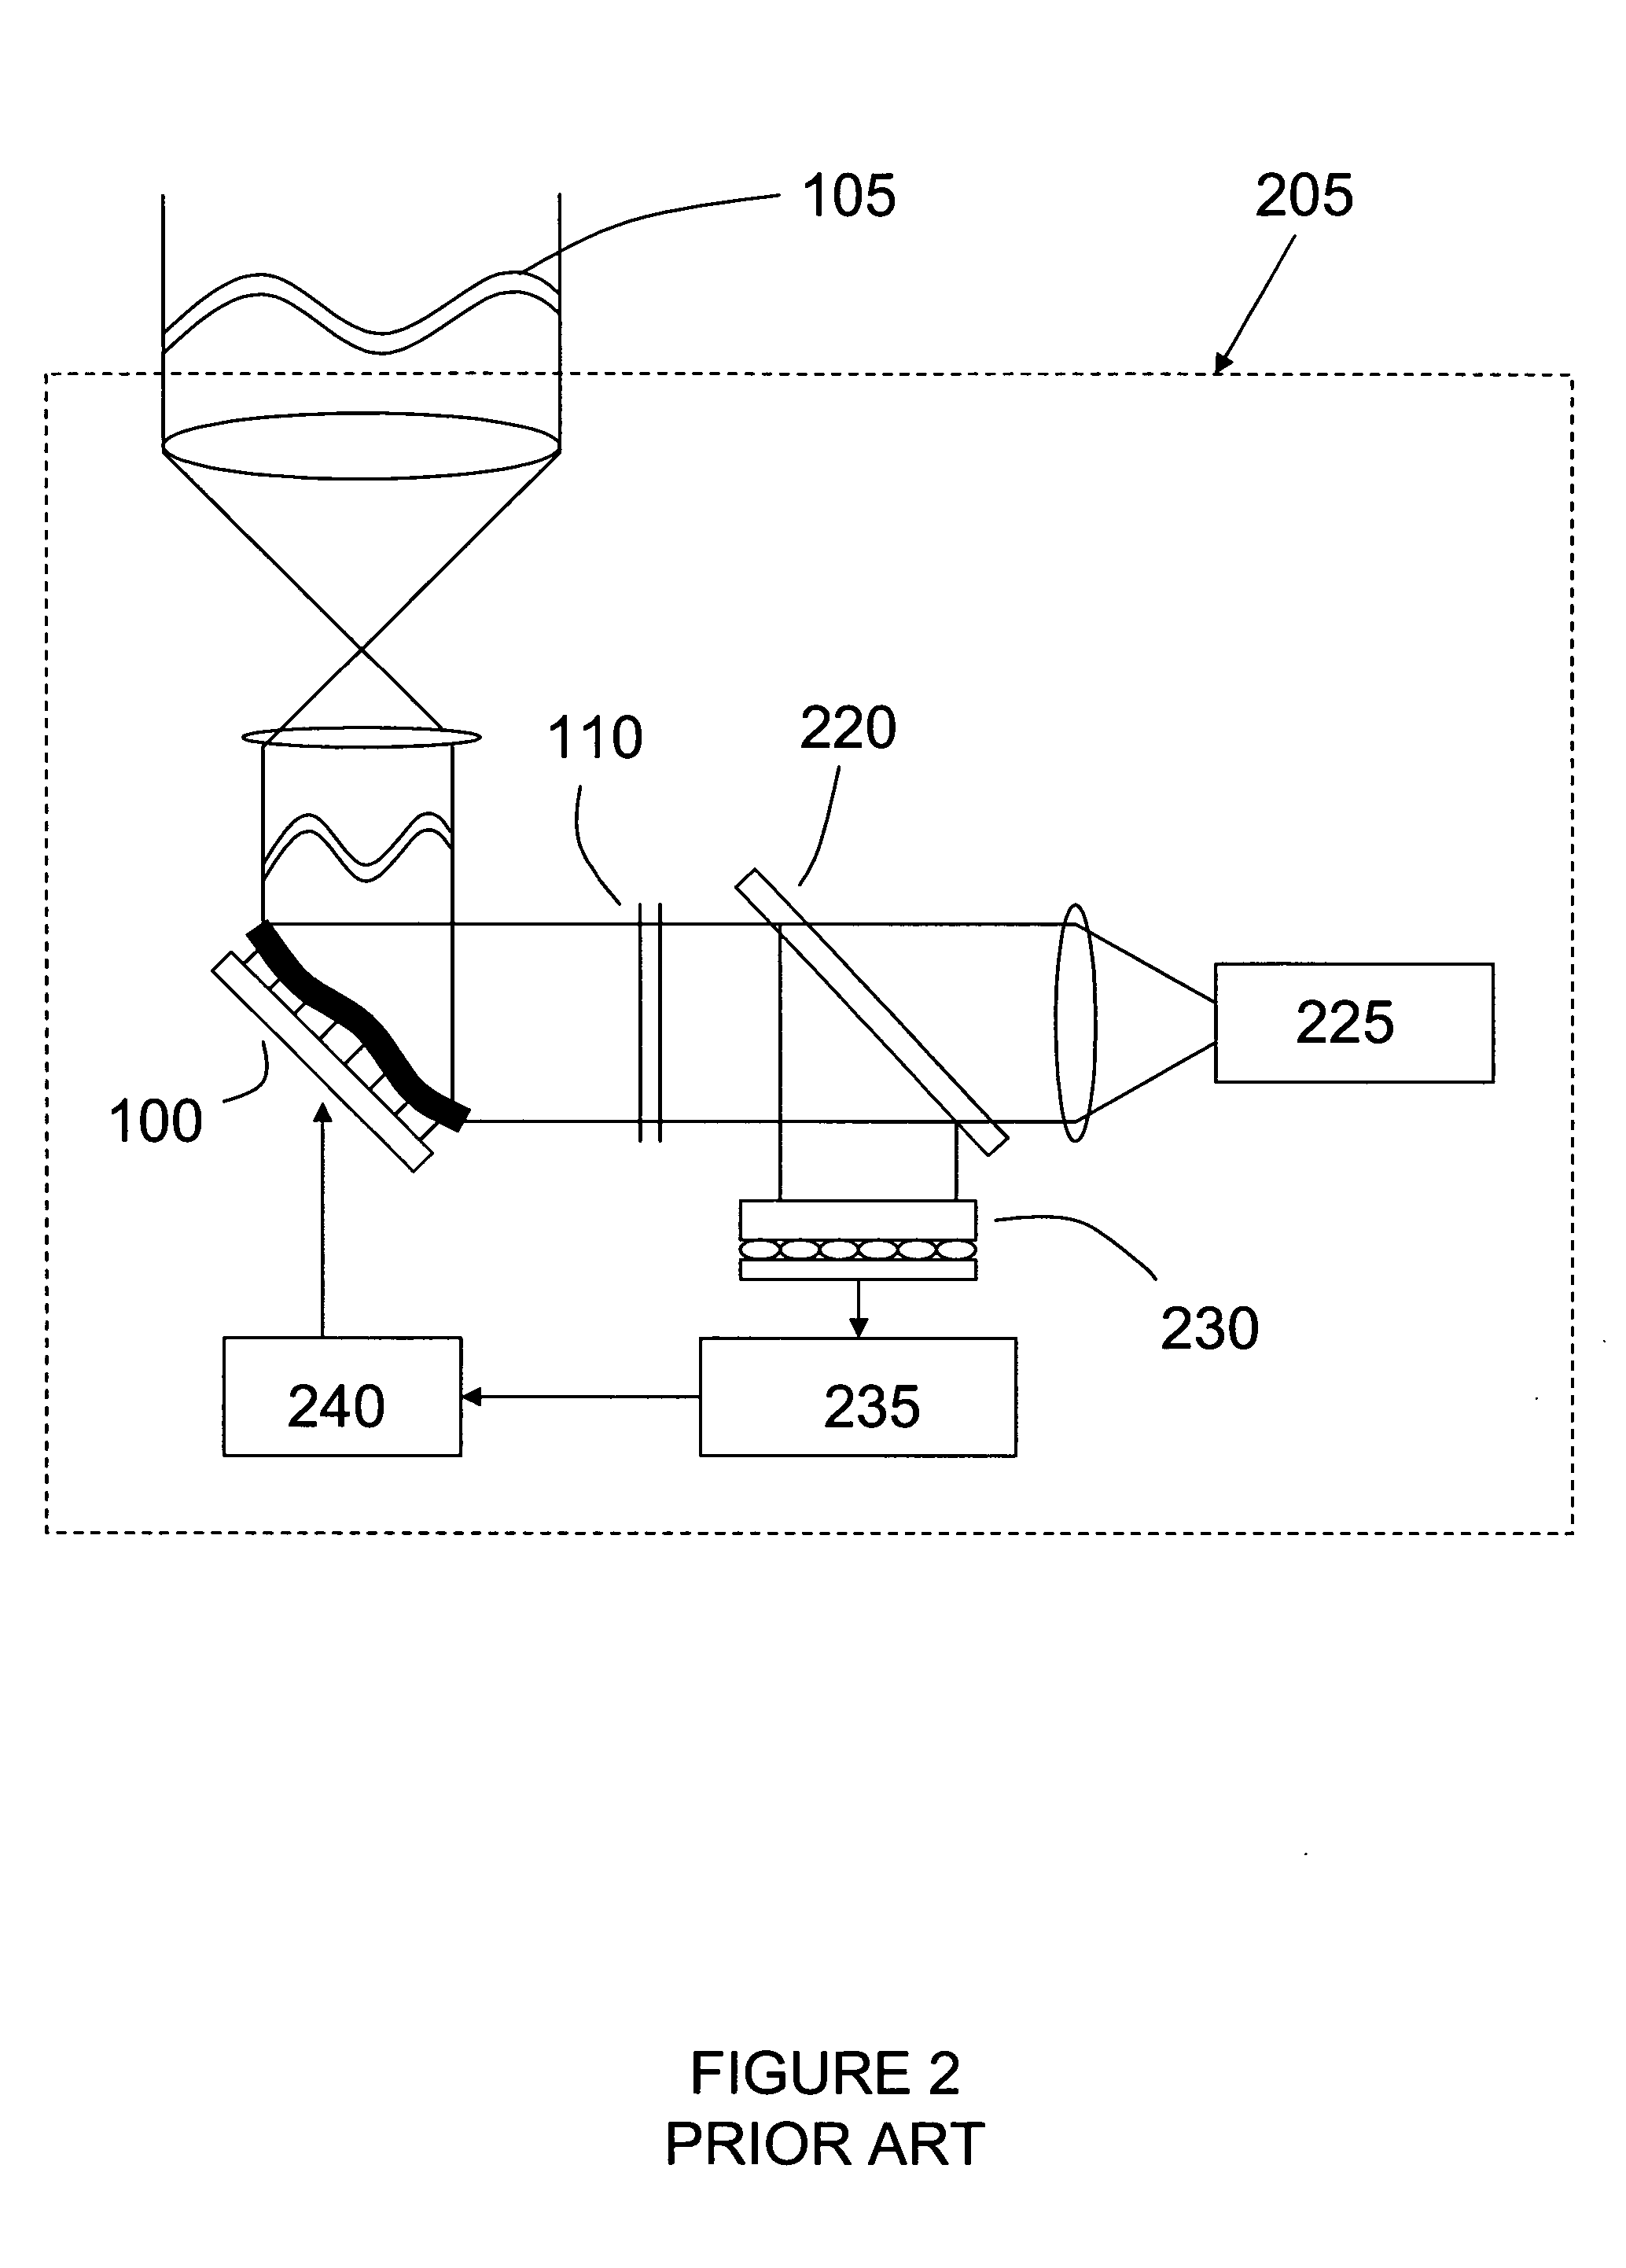 Deformable mirror method and apparatus including bimorph flexures and integrated drive